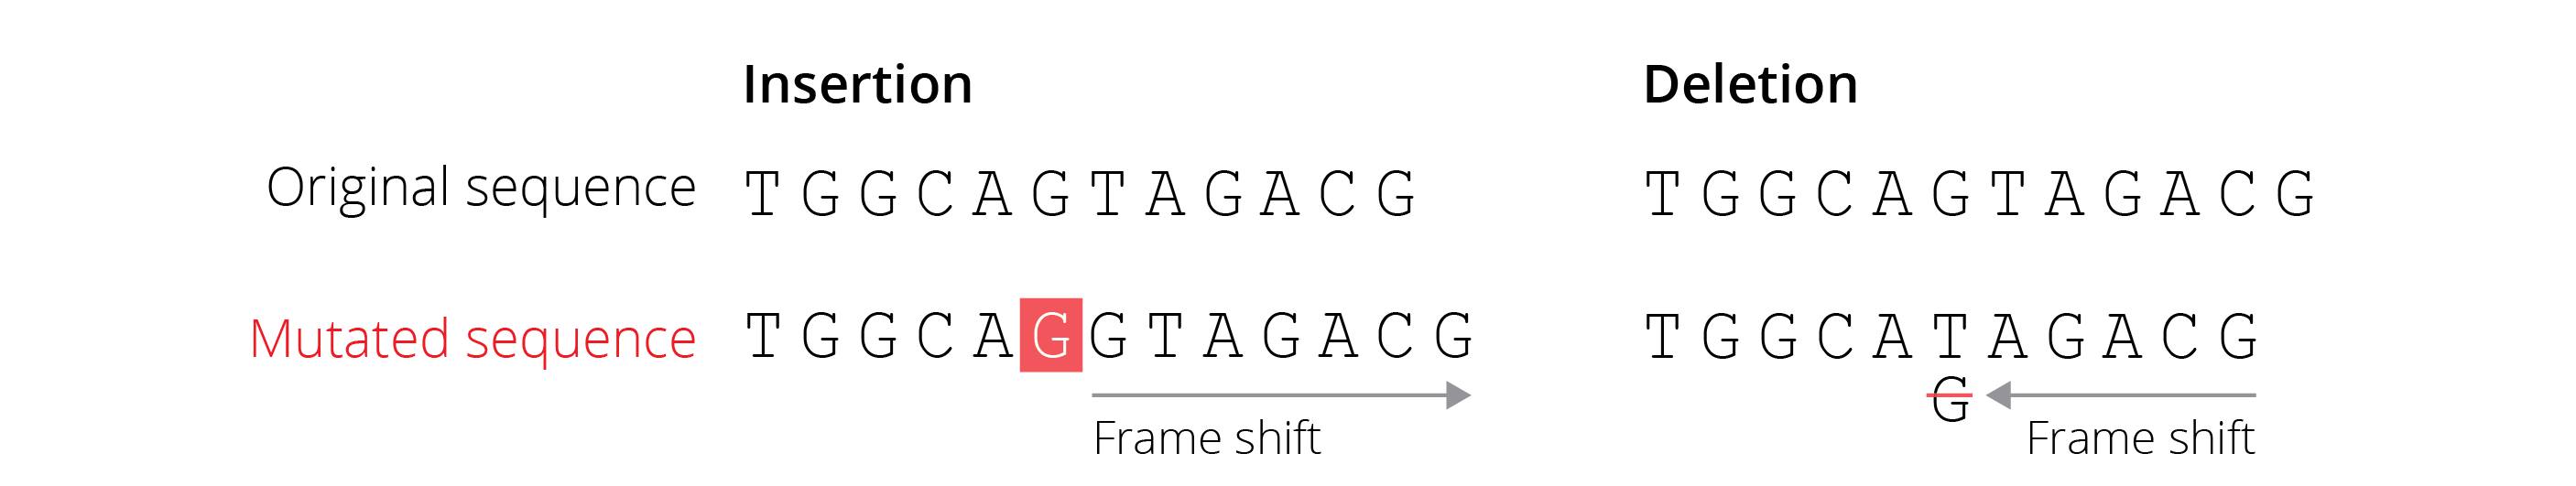 Frameshift mutations caused by insertions or deletions change the amino acid sequence and potentially insert premature stop codons.